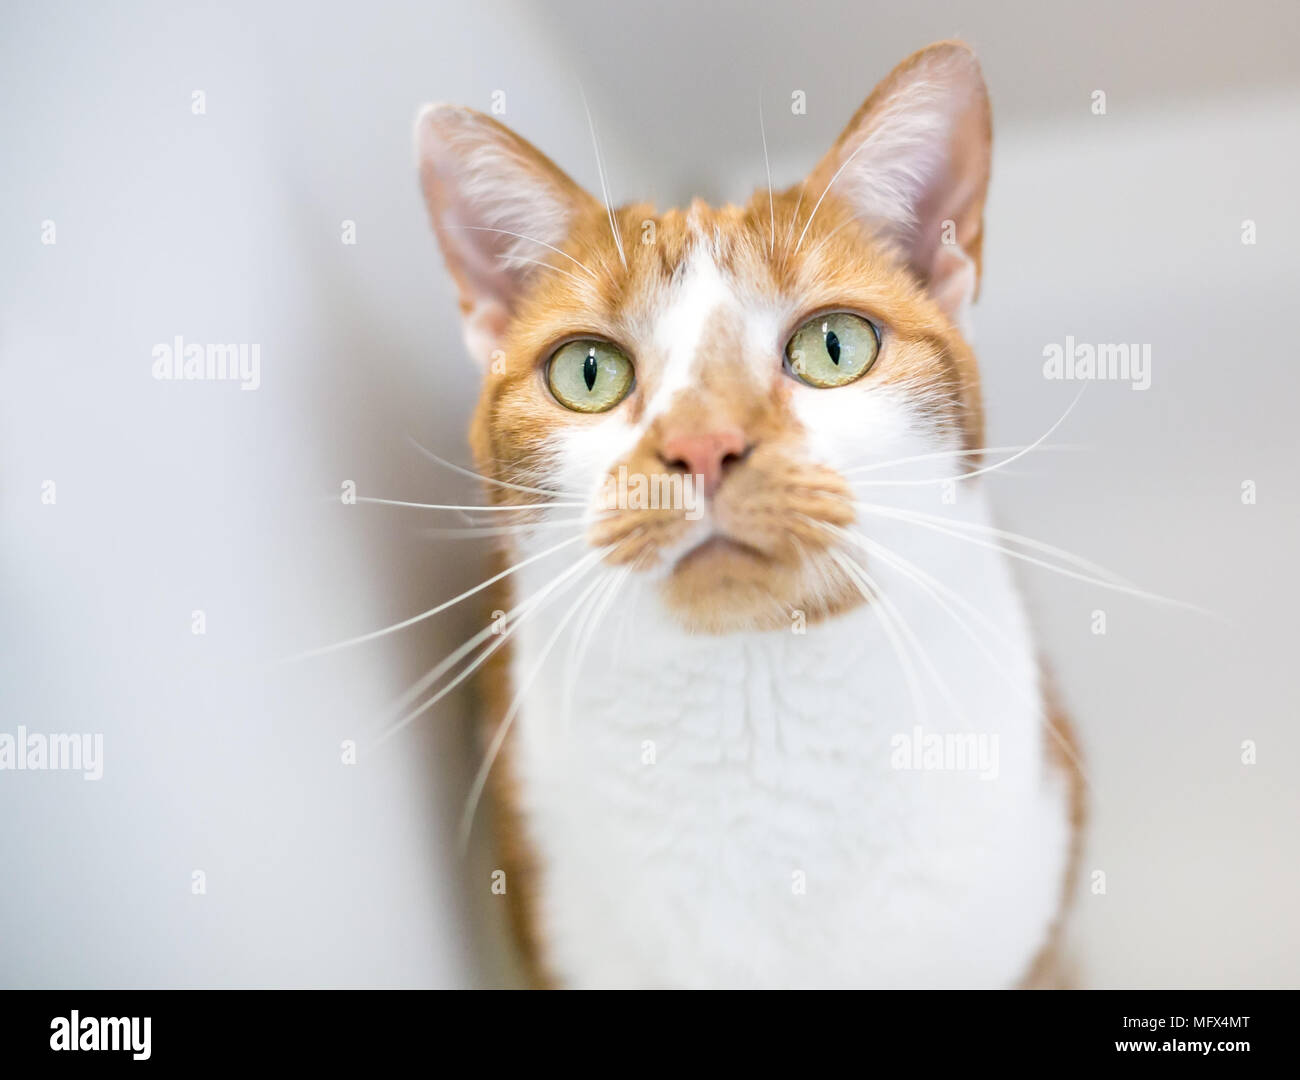 A domestic shorthair cat with orange tabby and white markings Stock Photo